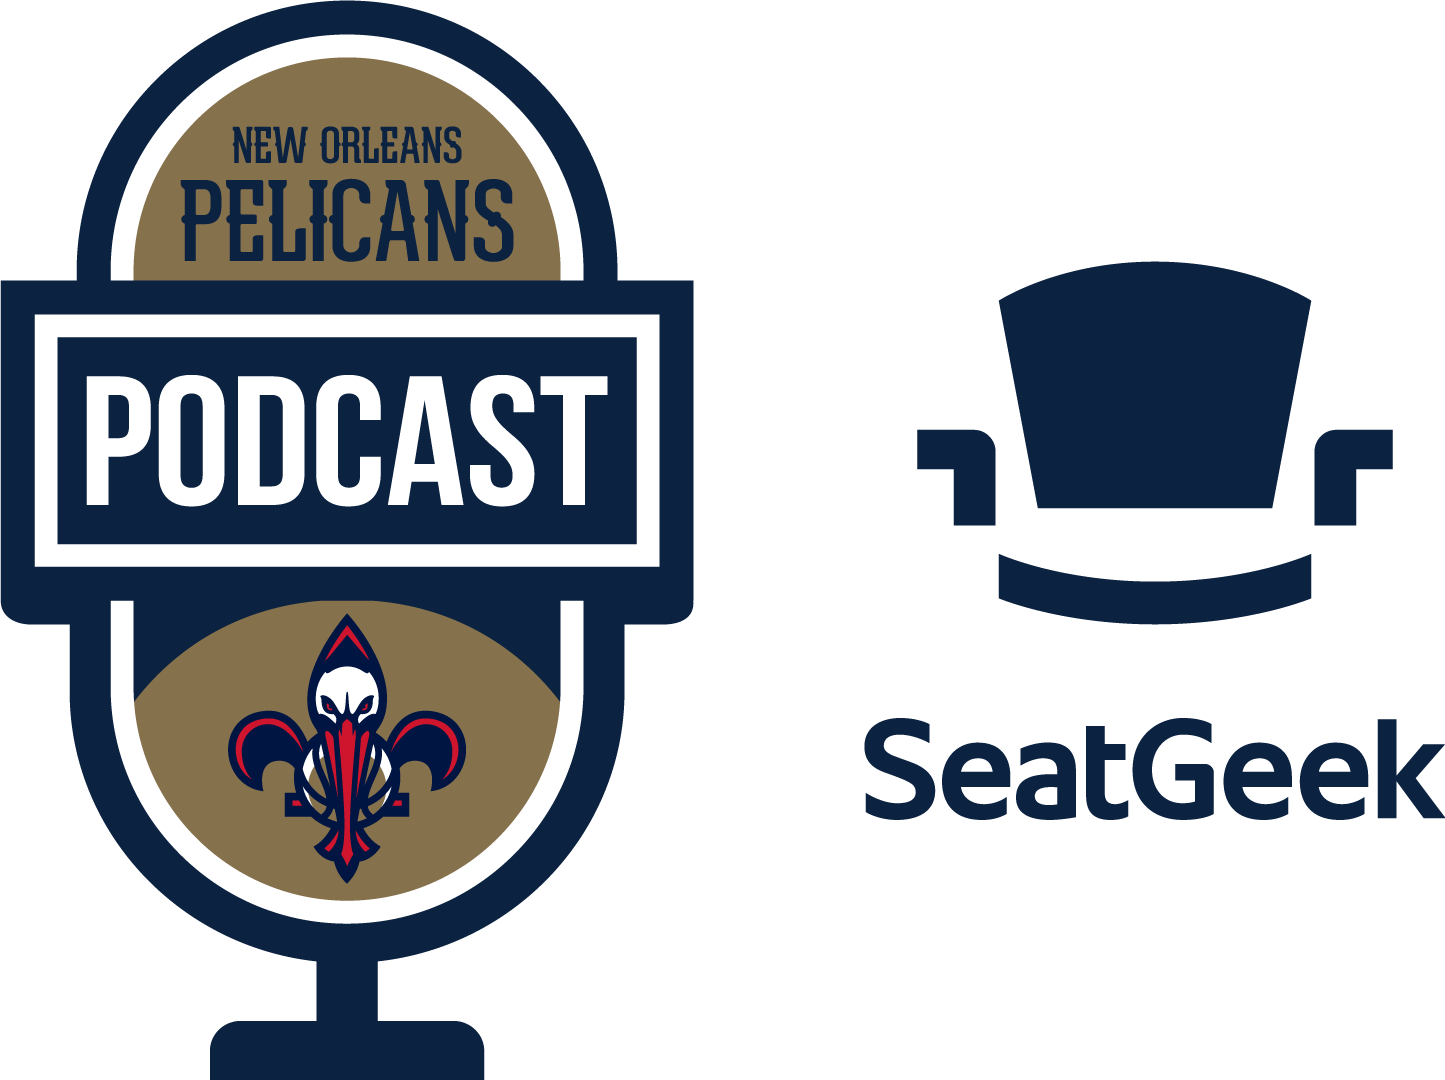 Joel Meyers on the New Orleans Pelicans Podcast presented by SeatGeek - August 12, 2021